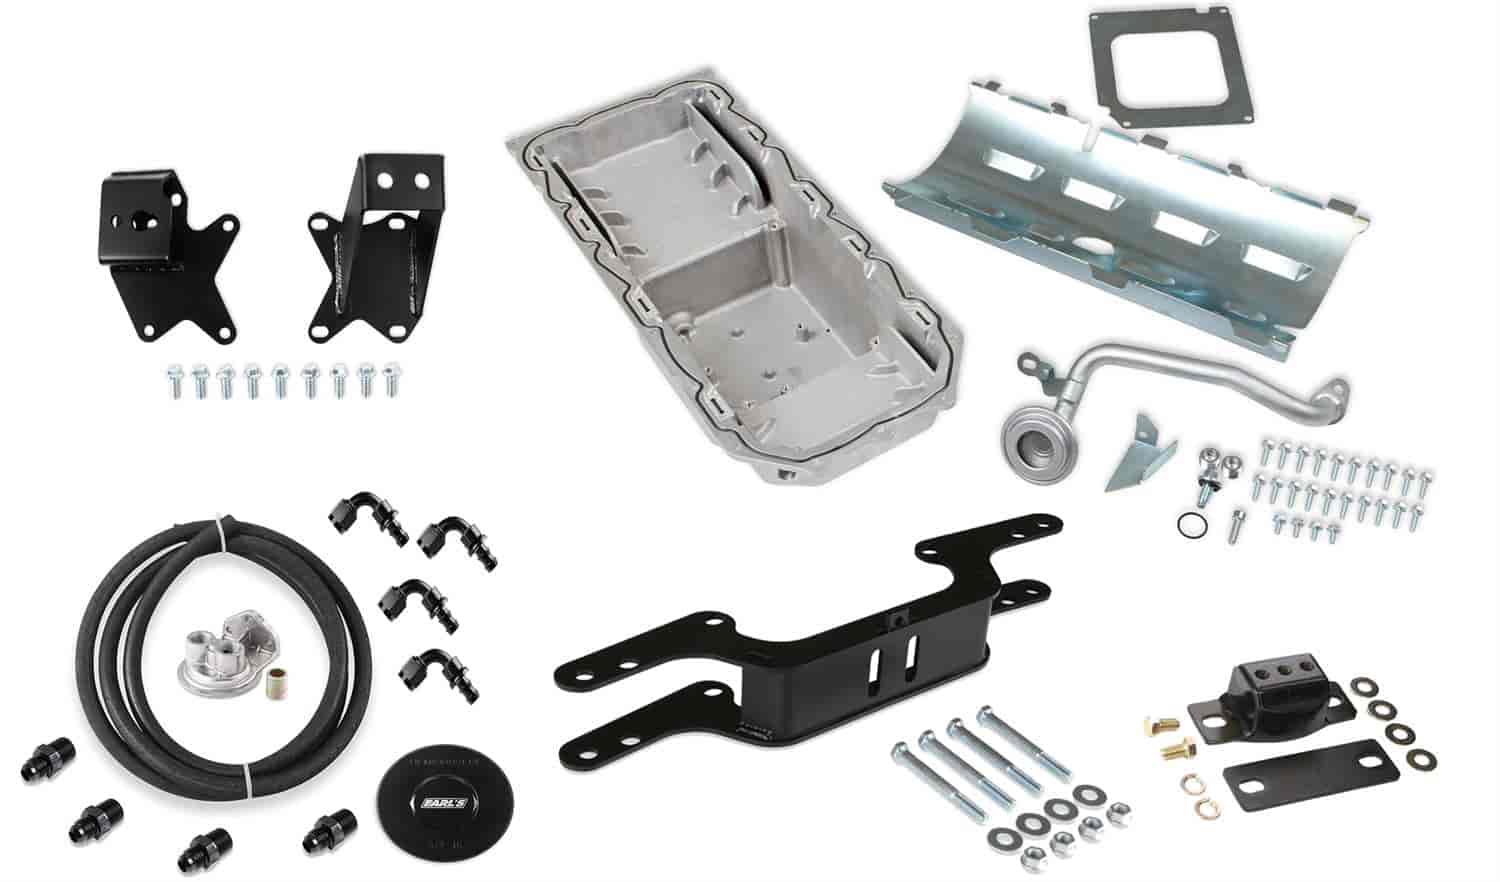 Blackheart Gen III Hemi [Non-VVT] Engine Swap Kit for 1970-1974 Dodge Challenger and Plymouth Barracuda